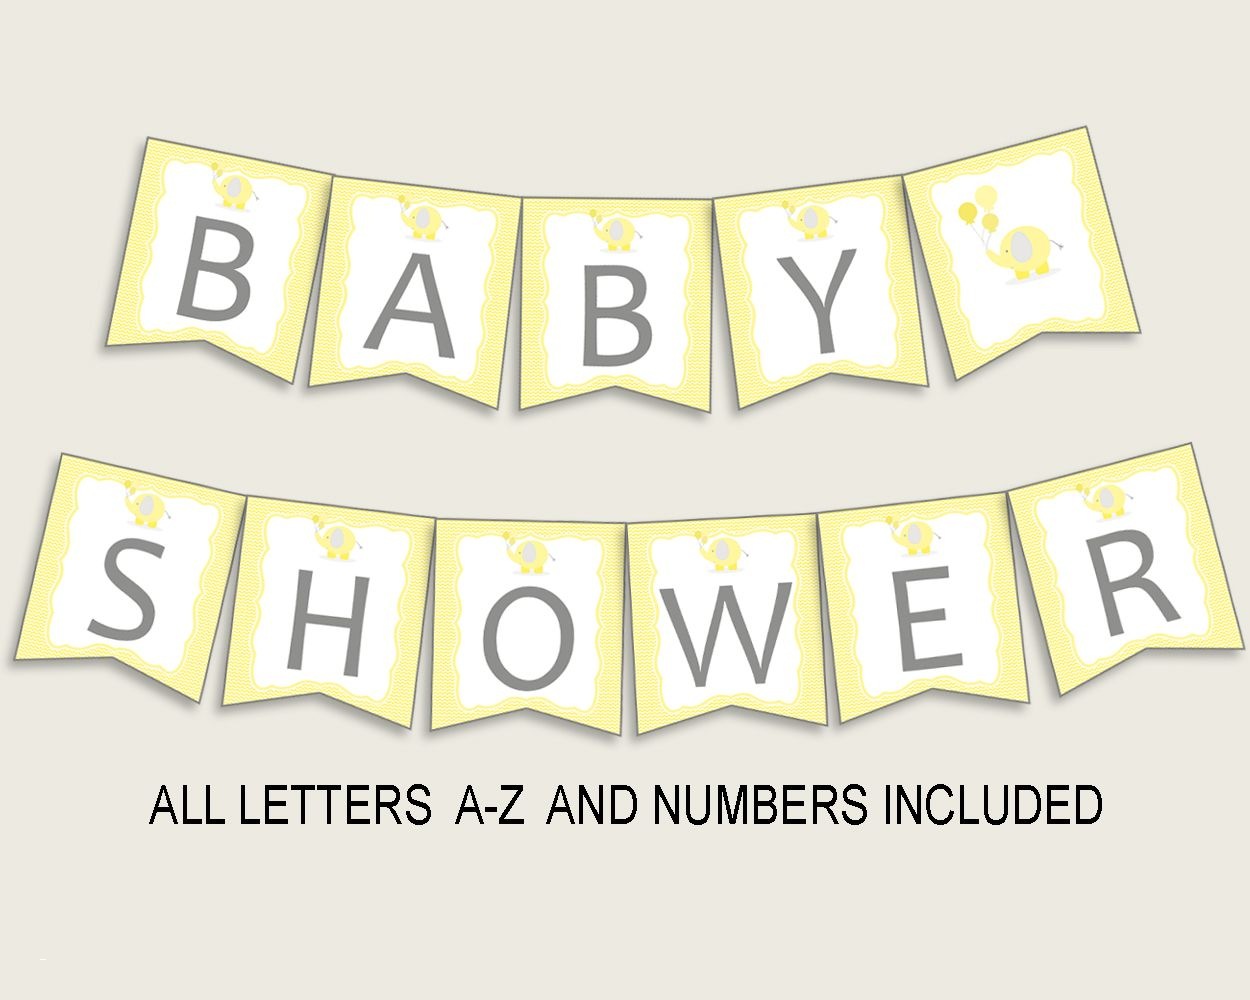 Full Size of Baby Shower:89+ Indulging Baby Shower Banner Picture Inspirations Baby Shower Banner Banner Ideas For Baby Shower Luxury Banner Baby Shower Banner Yellow